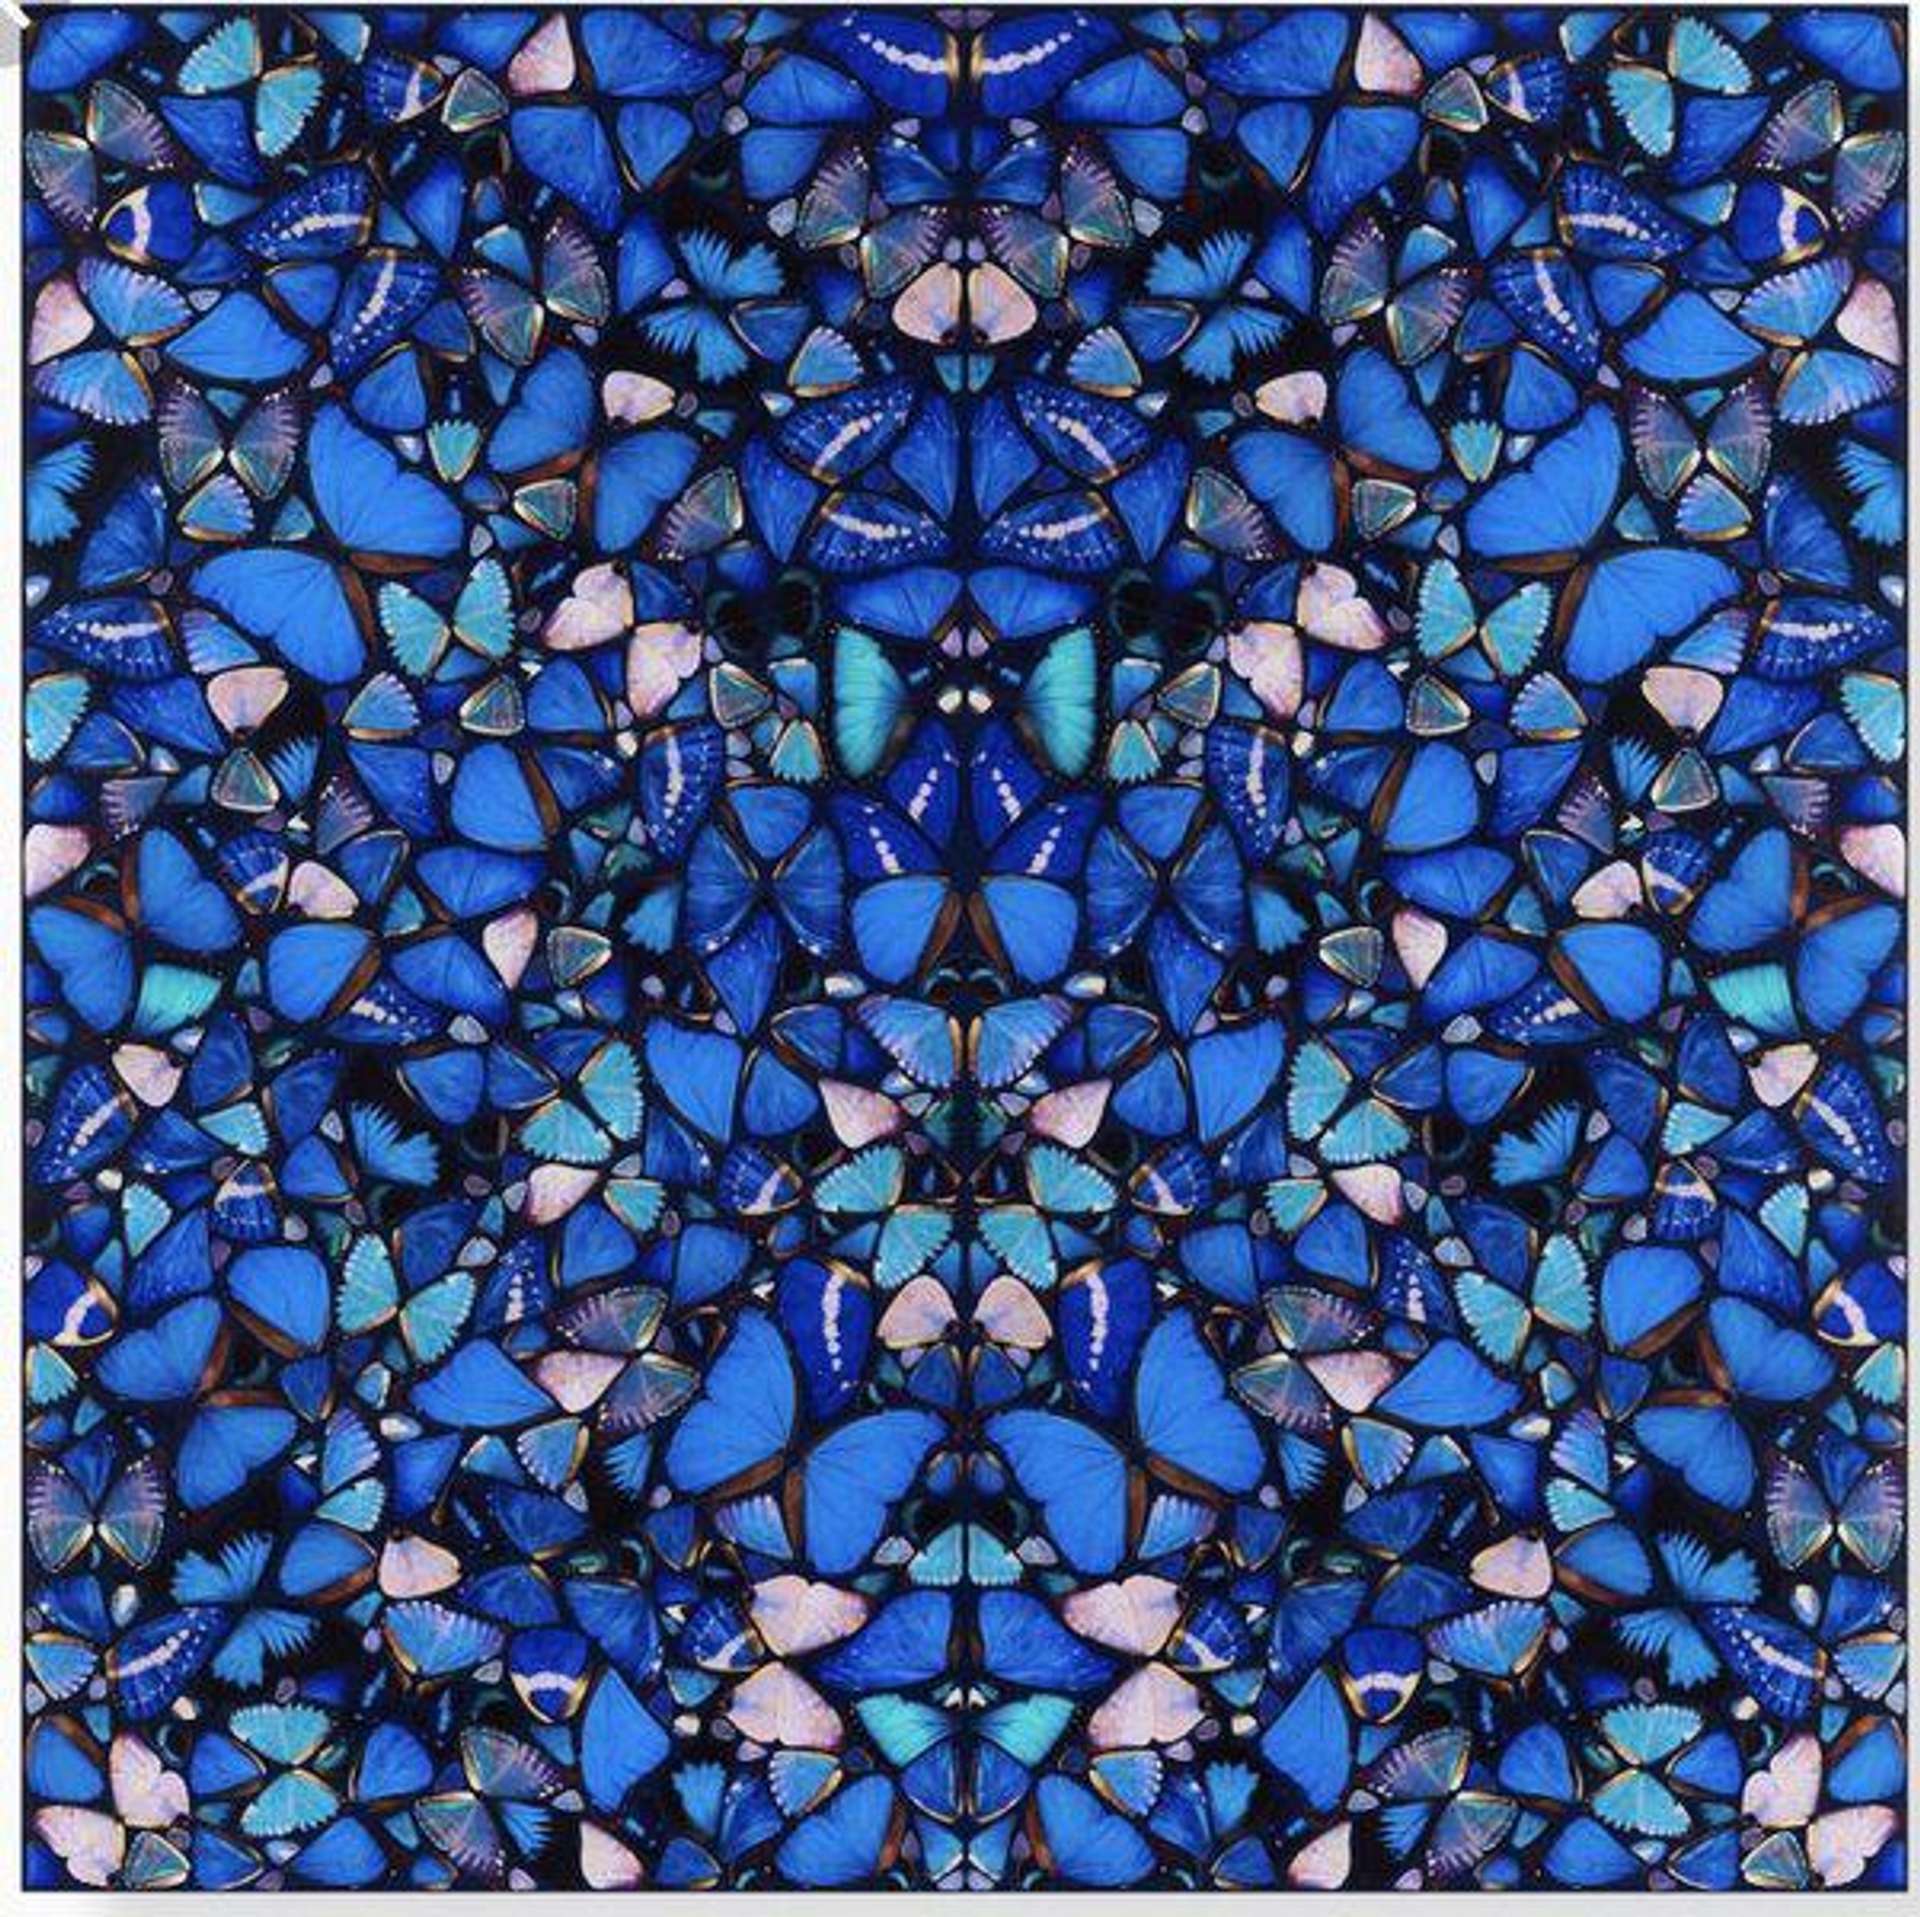 An image of Damien Hirst's artwork titled H6-1 Mercy. The piece features a mosaic composition of butterflies in various shades of blue.